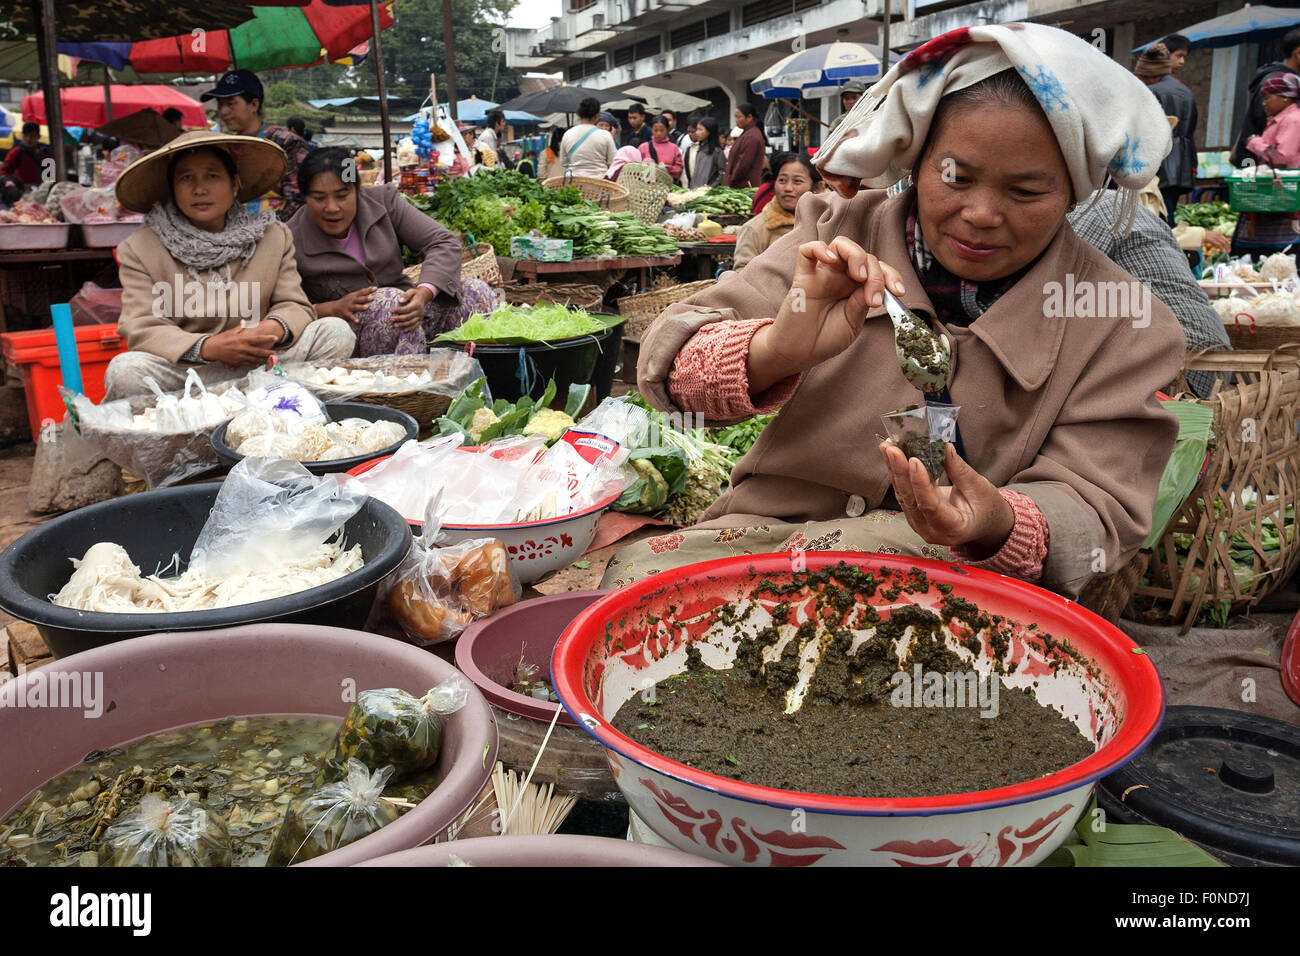 Native woman filling paste into a cup, market, local market, Kyaing Tong, Shan State, Myanmar Stock Photo